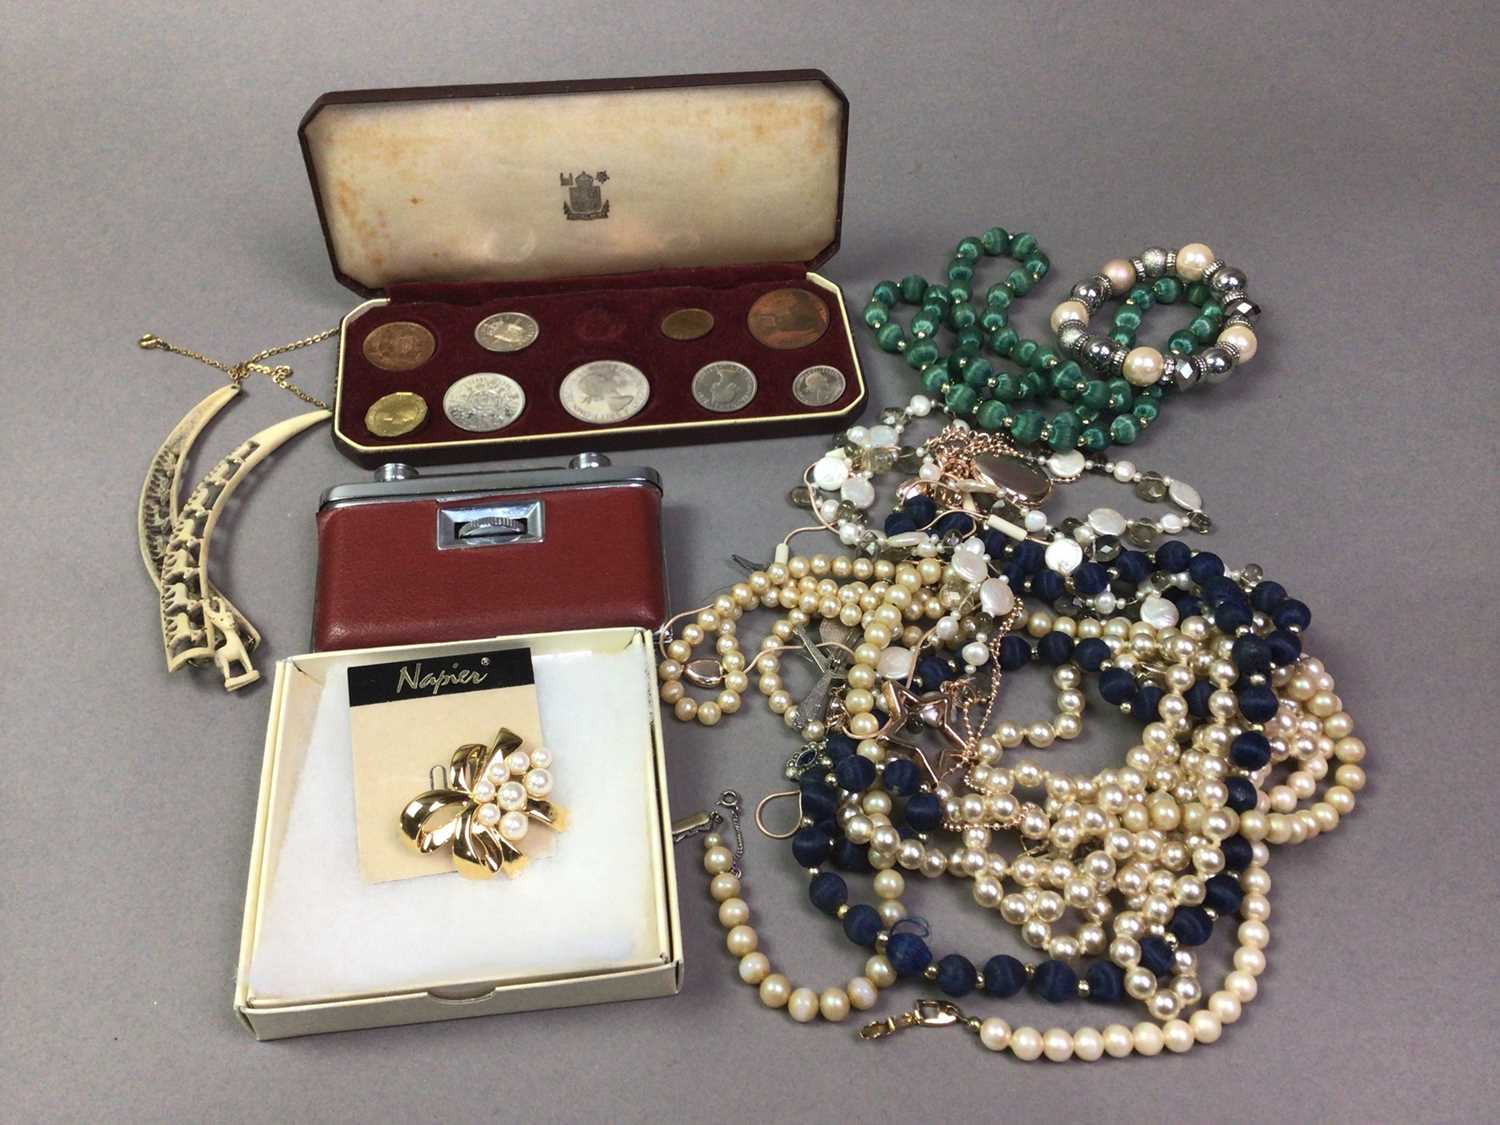 LOT OF COSTUME JEWELLERY ALONG WITH COINS AND A PAIR OF OPERA GLASSES - Image 2 of 2